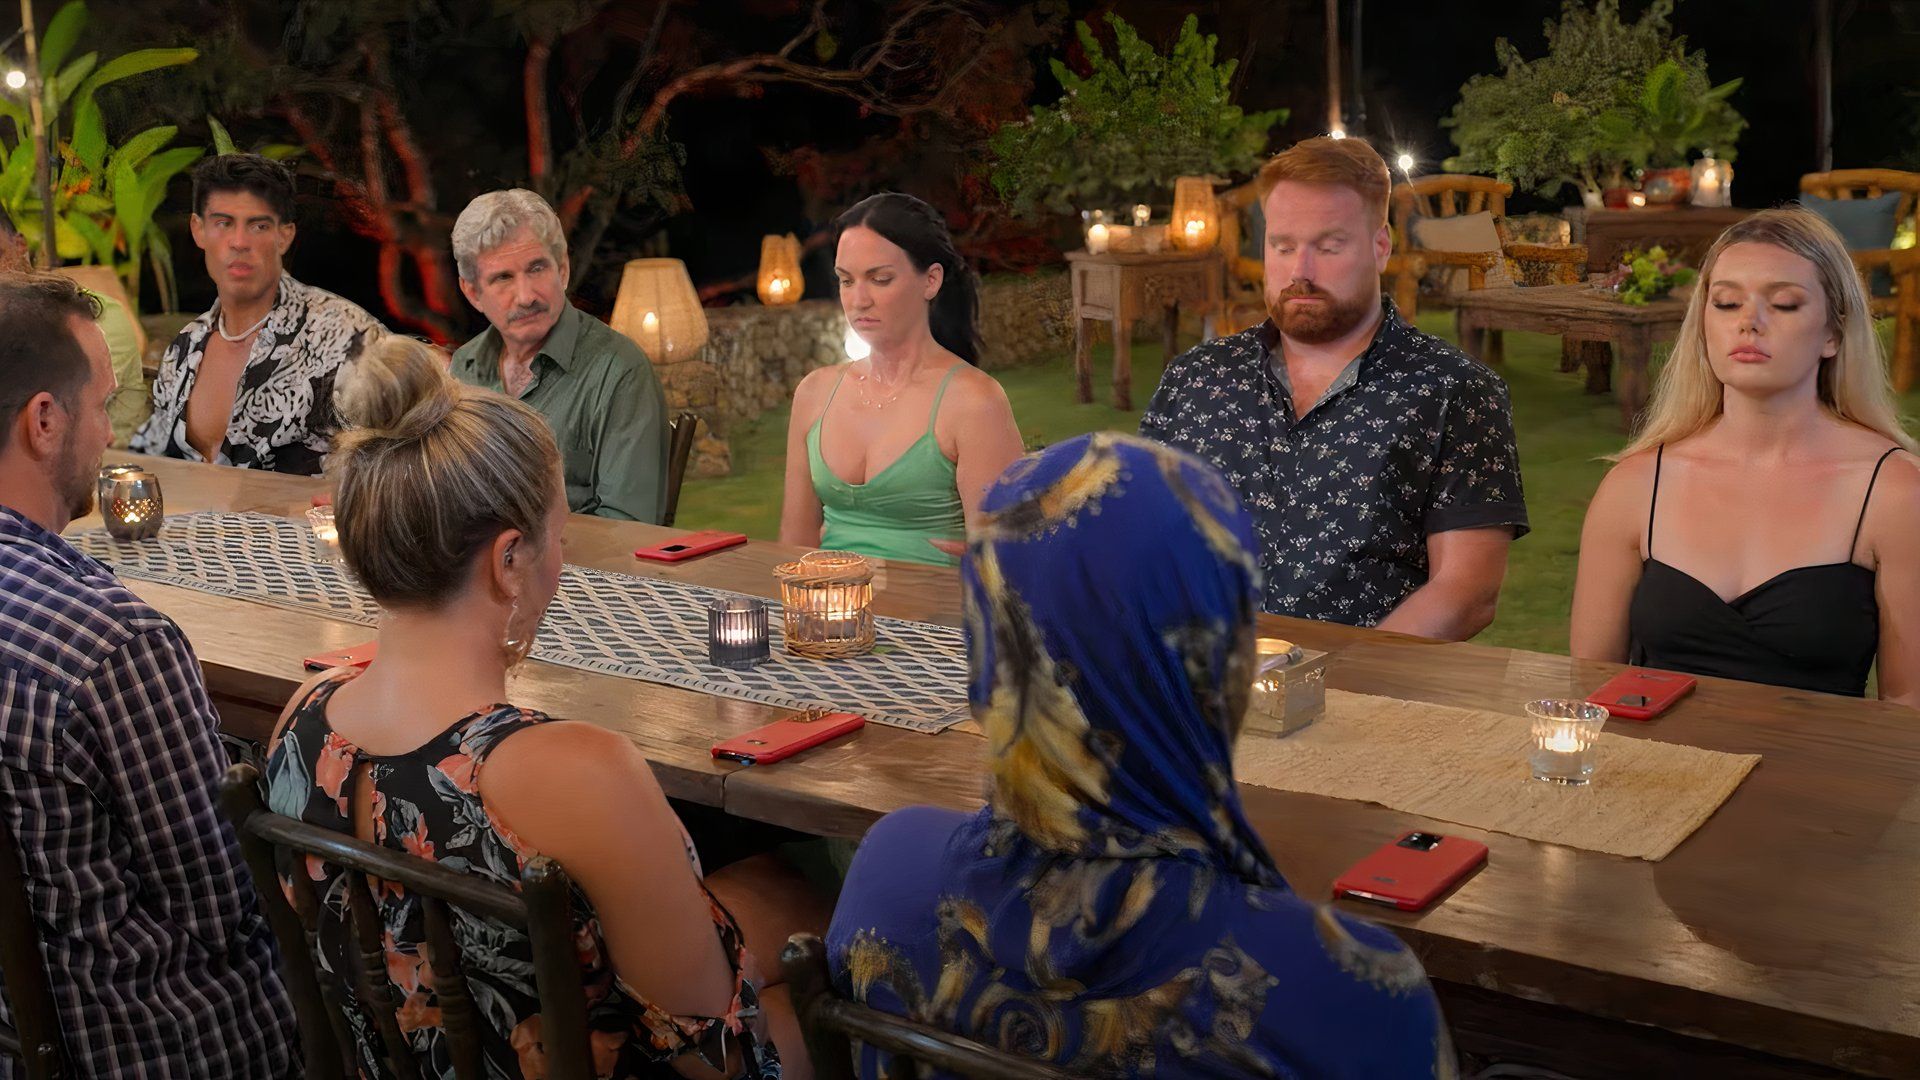 The Mole Season 2 trailer screenshot shows the contestants sitting at a table.